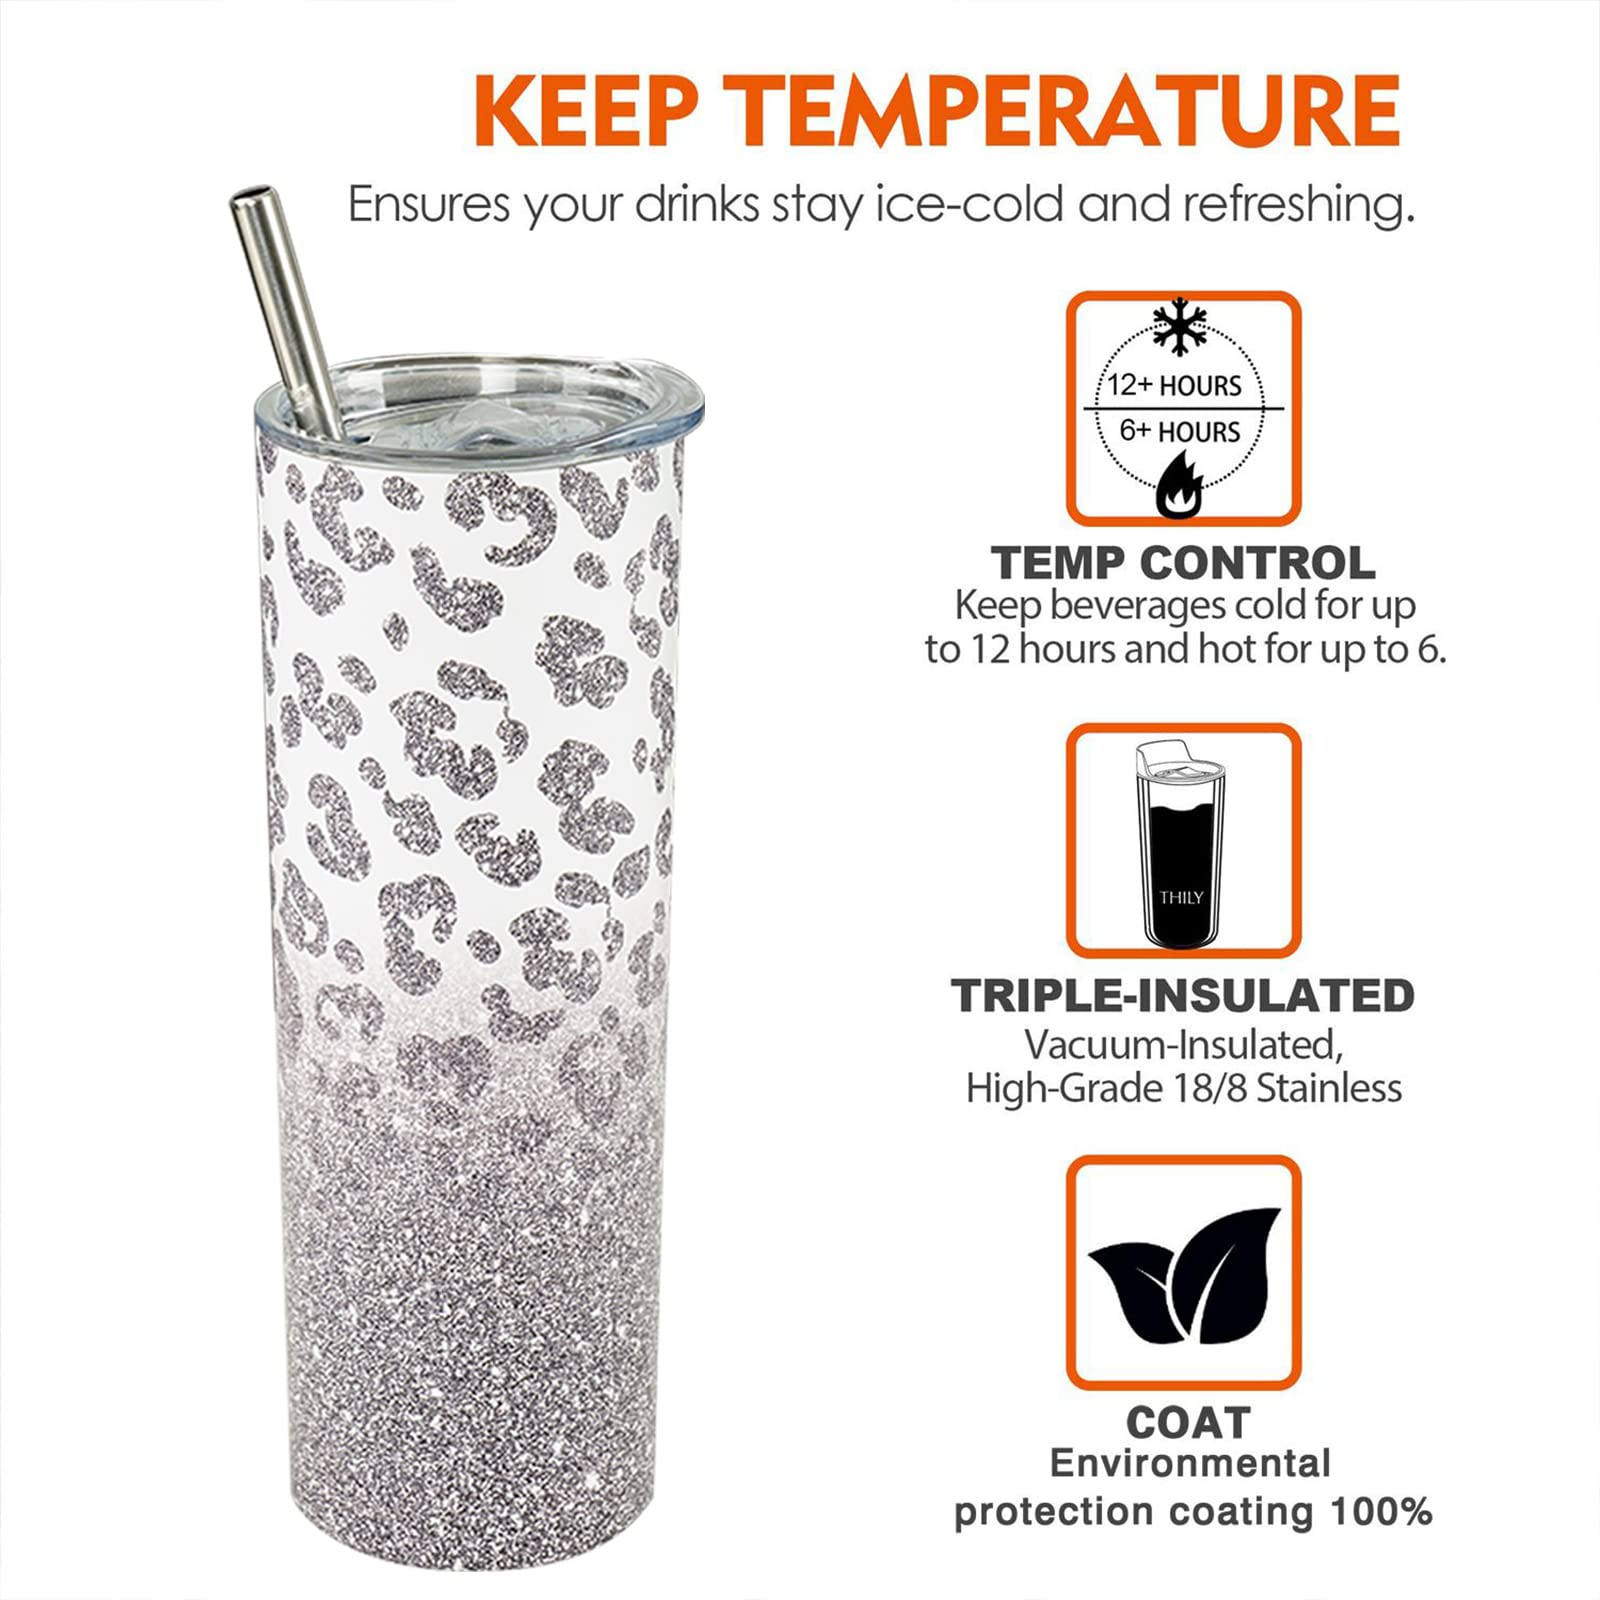 Heqianco Leopard Tumbler With Lid and Straw Cheetah Tumbler Leopard Print Skinny Tumbler Leopard Print Tumbler Cheetah Print Cups Water Bottle Coffee Tumbler Travel Mug Gifts for Women